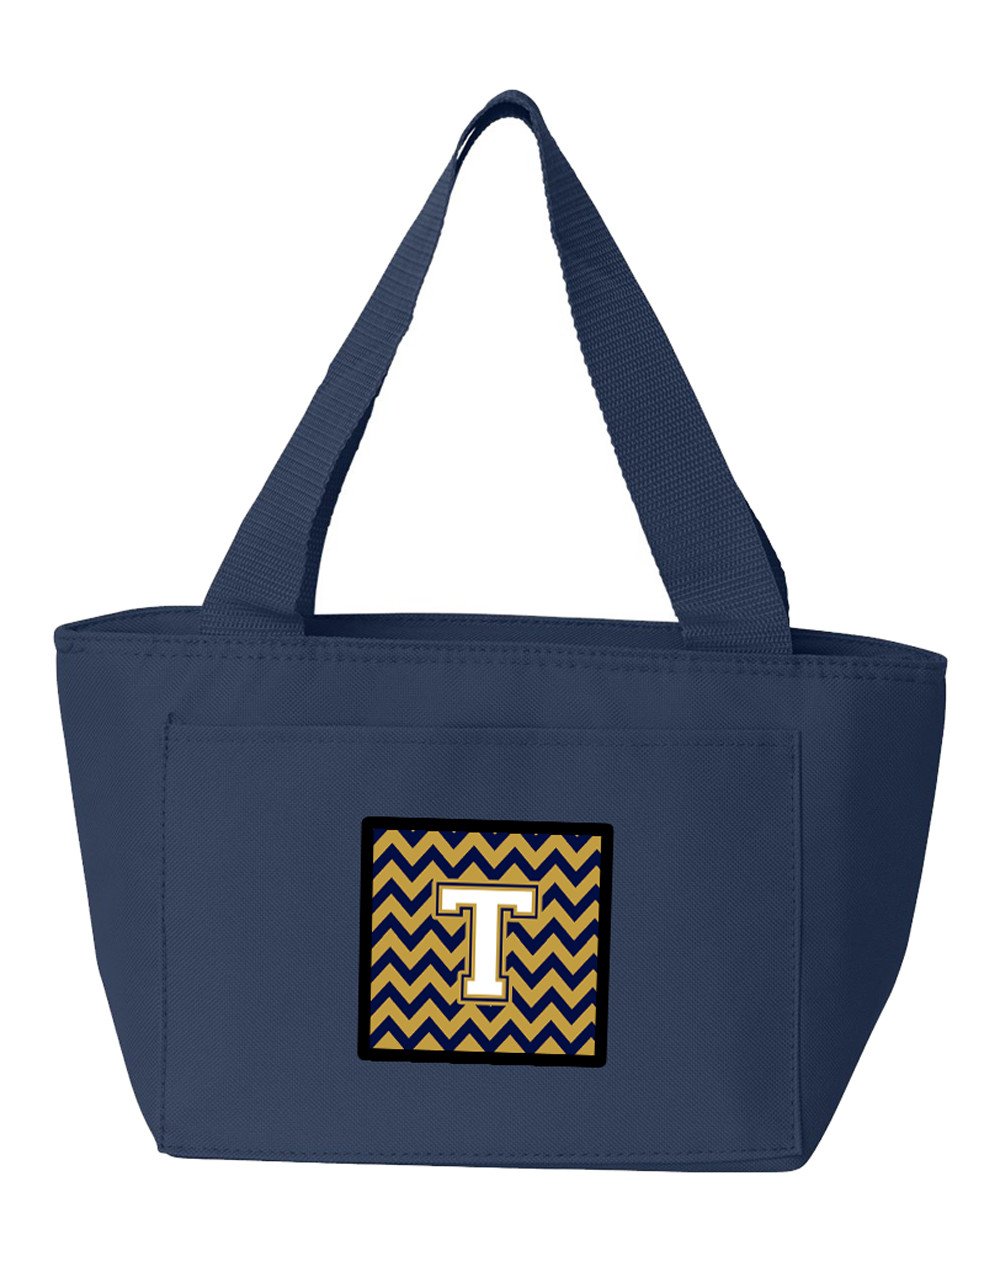 Letter T Chevron Navy Blue and Gold Lunch Bag CJ1057-TNA-8808 by Caroline's Treasures